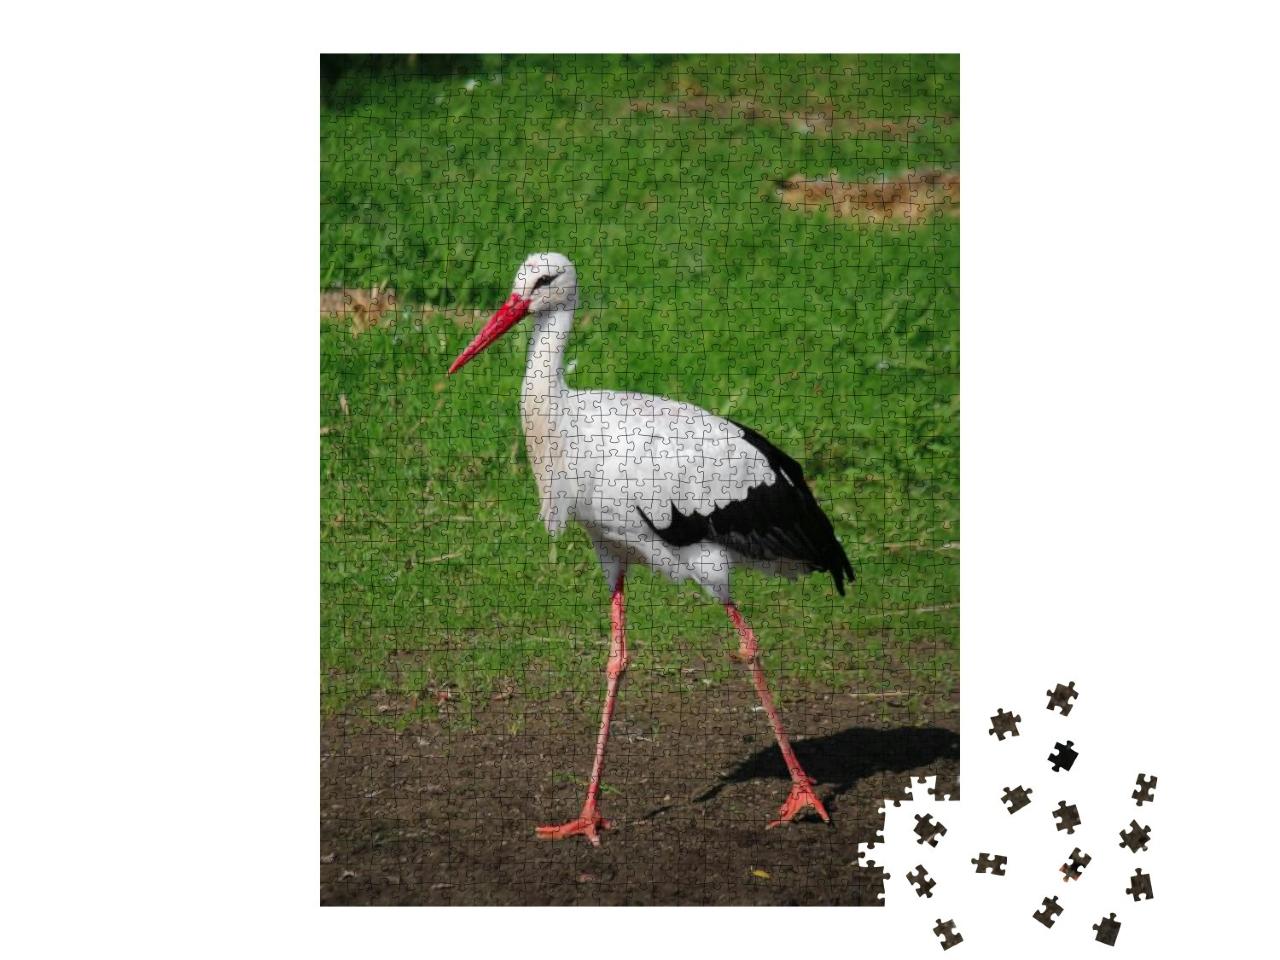 Small Stork is Walking in the Garden... Jigsaw Puzzle with 1000 pieces